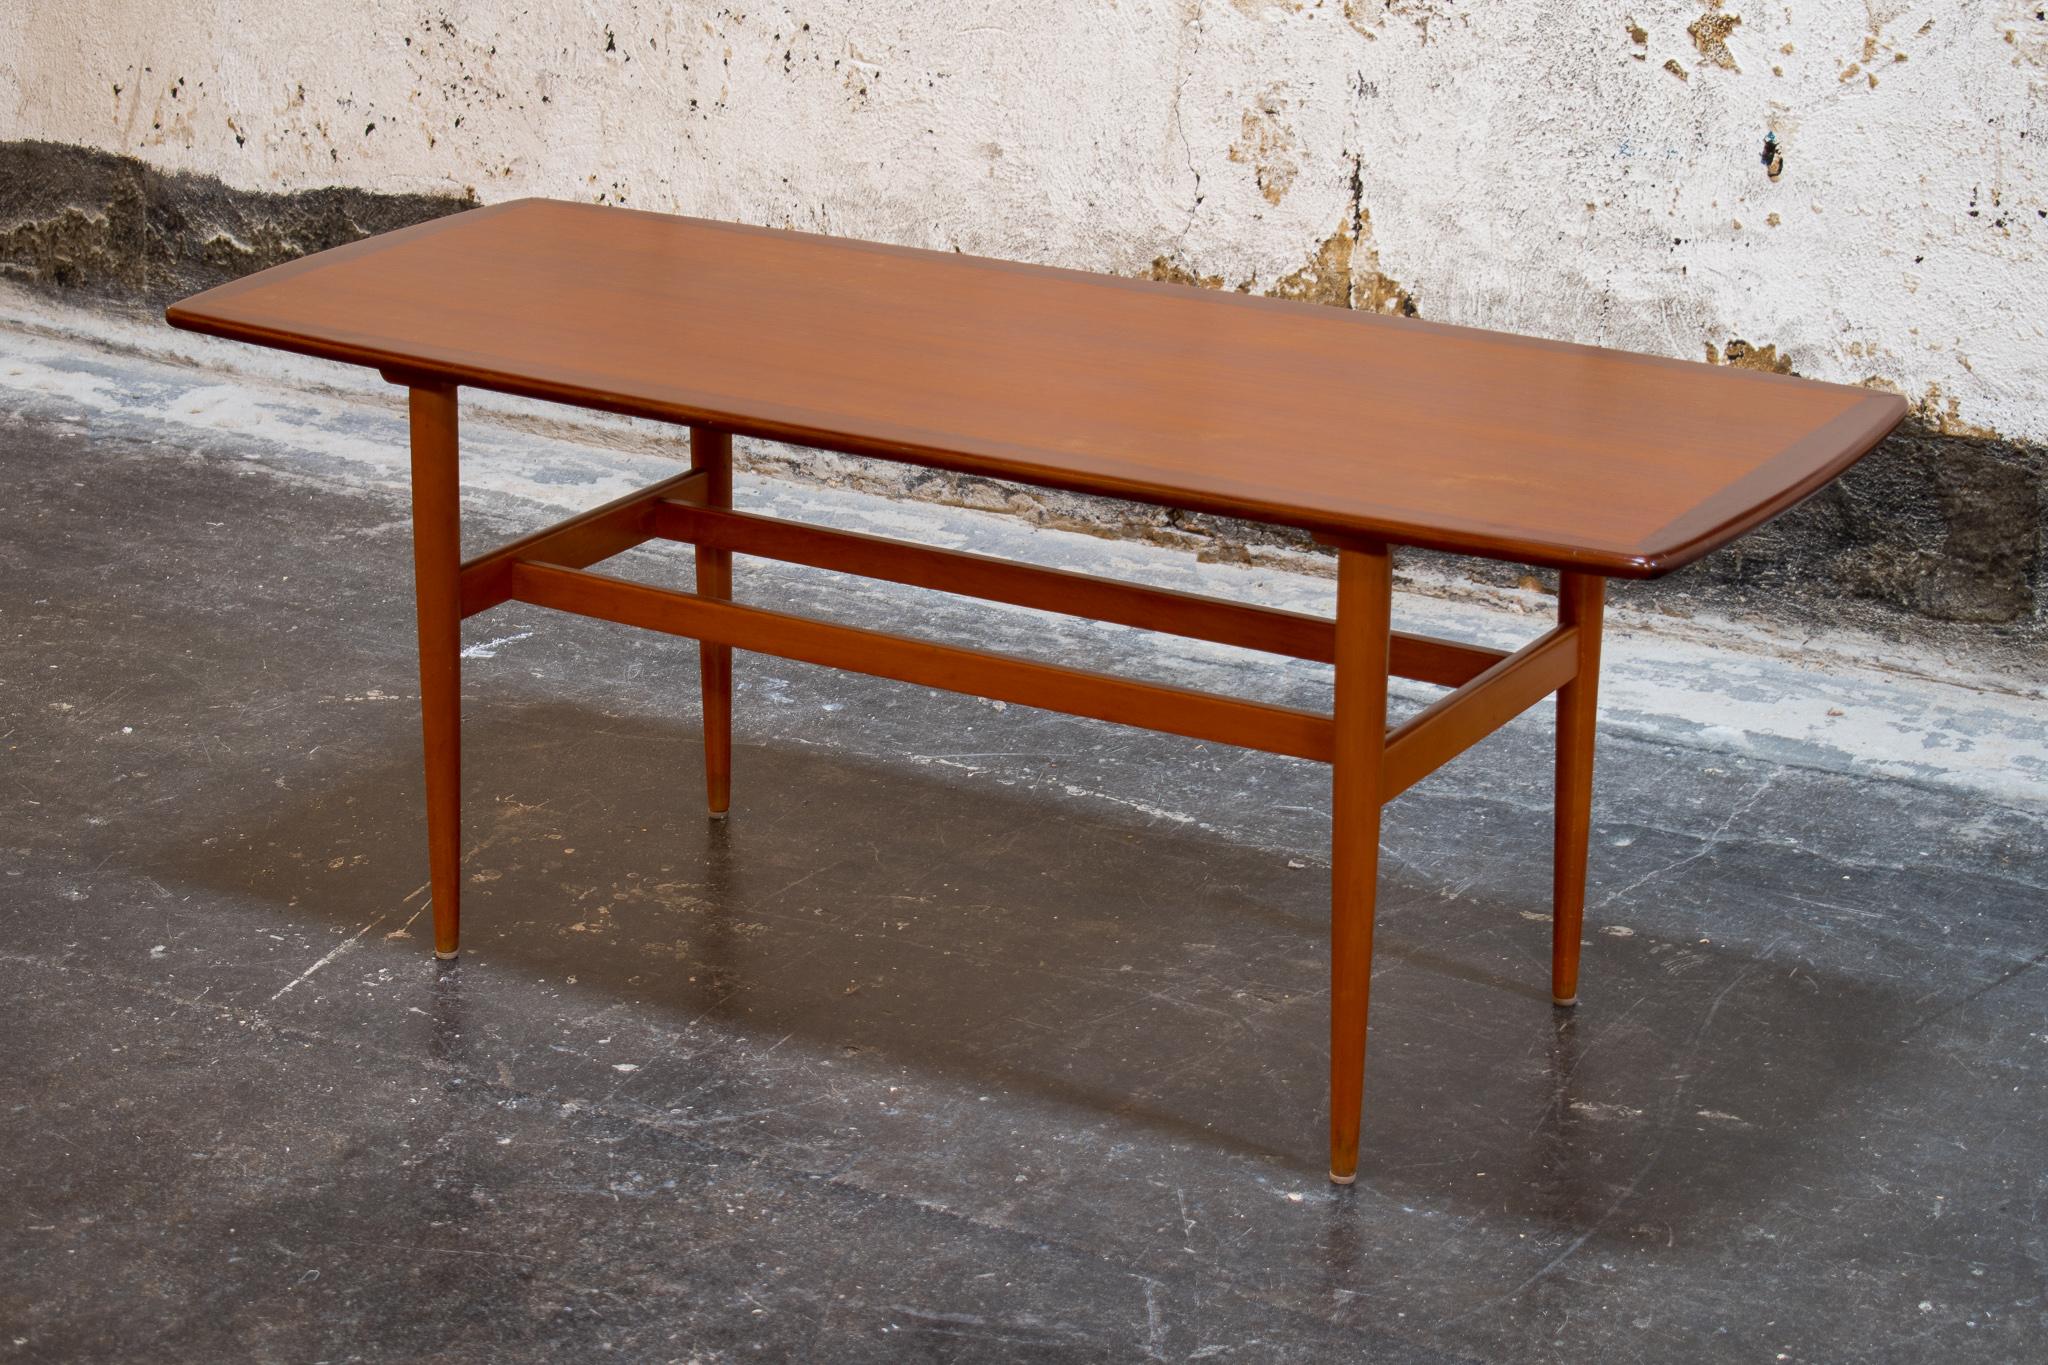 Midcentury Swedish long and slender coffee table, with dark teak border detail. Slightly rounded corners and turned legs complete the perfect mid-mod look. This elegant and understated coffee-table would work well in many design styles including